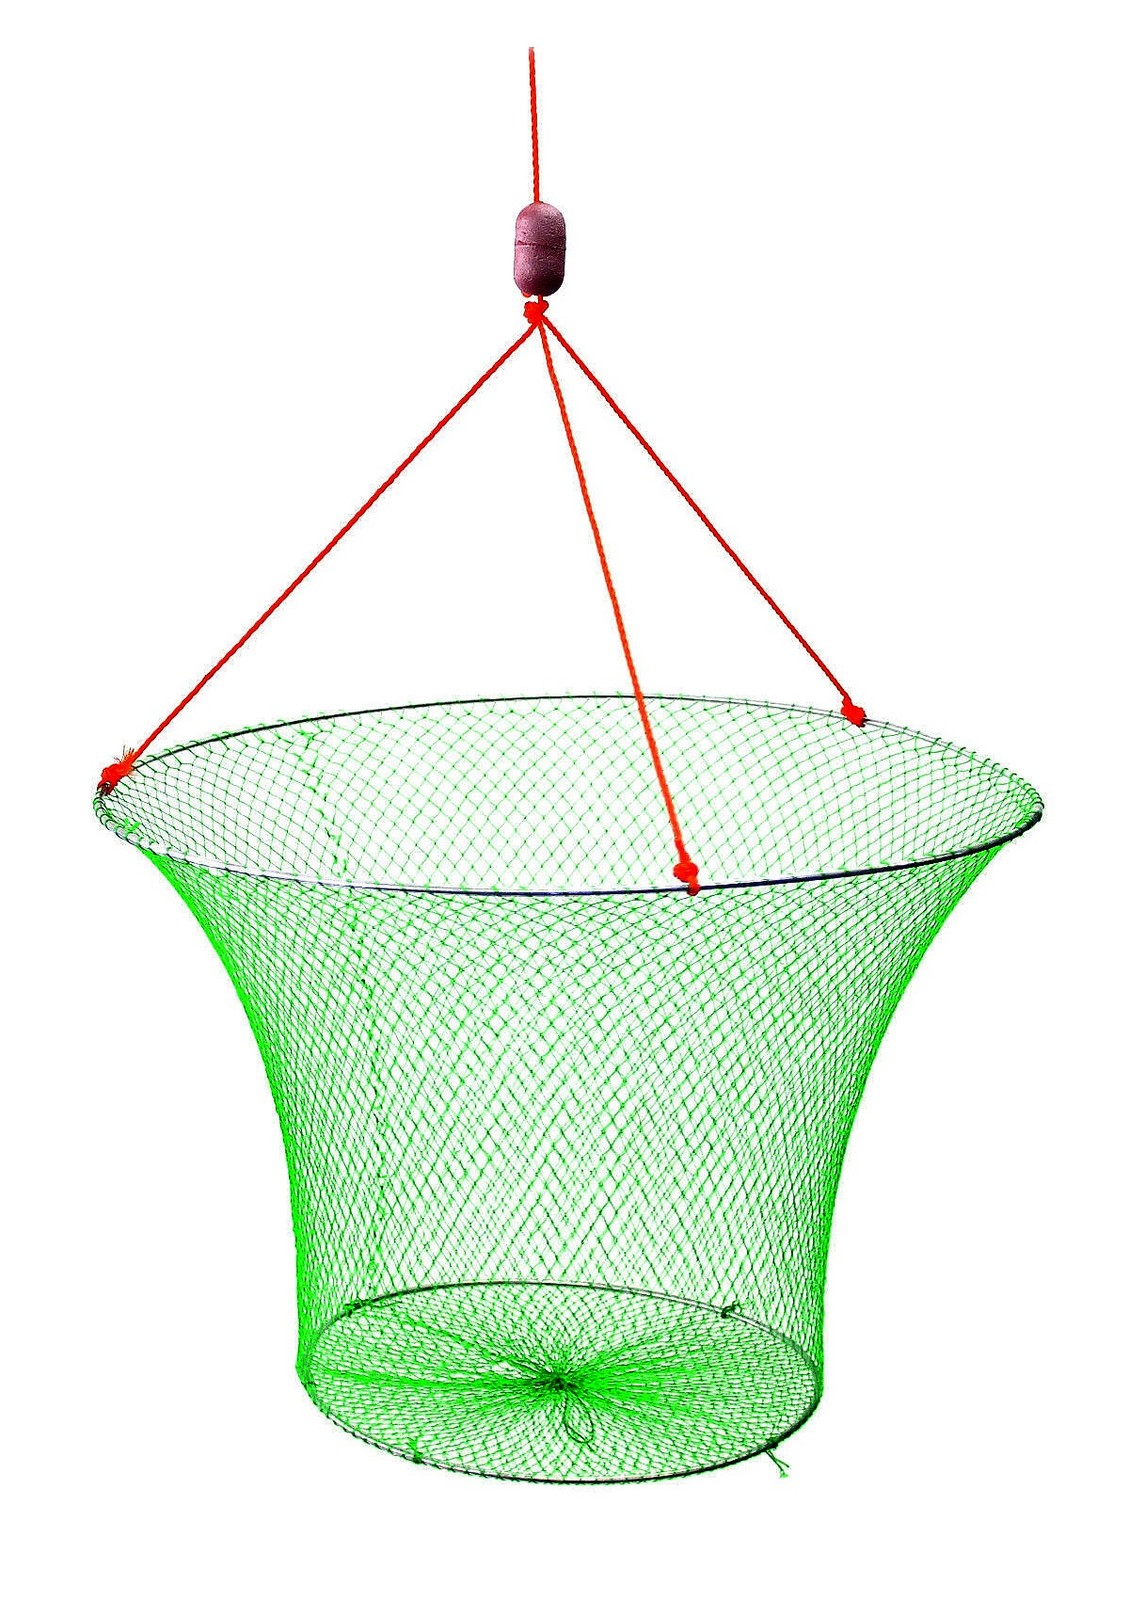 WILSON DOUBLE RING YABBIE NET WITH 3/4 MESH - DROP NET - RED CLAW